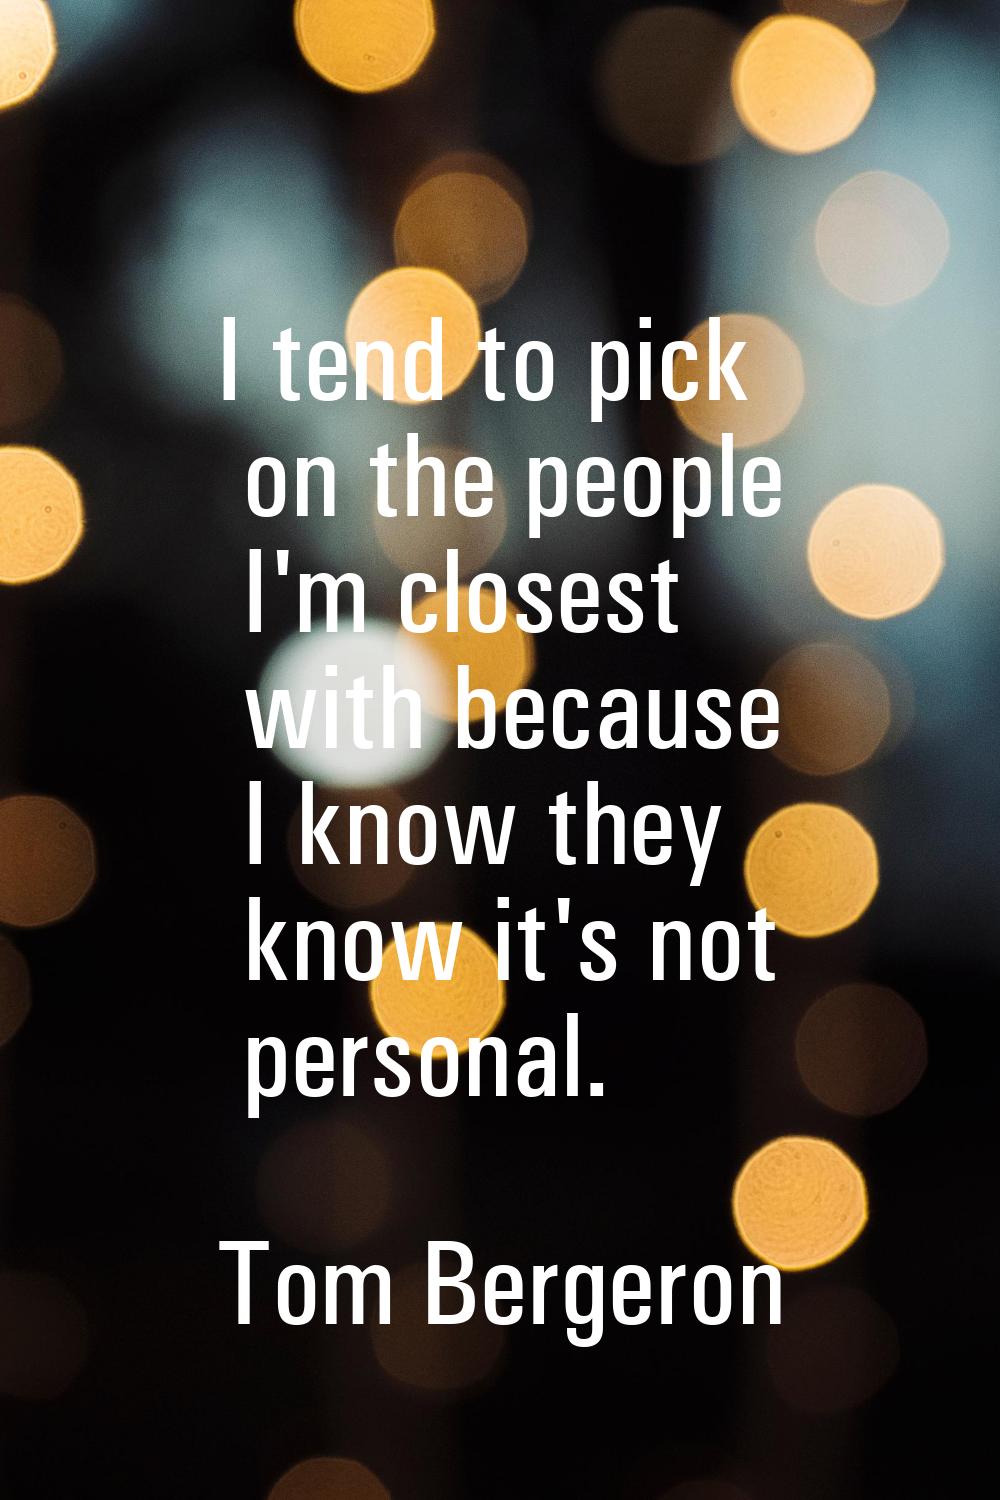 I tend to pick on the people I'm closest with because I know they know it's not personal.